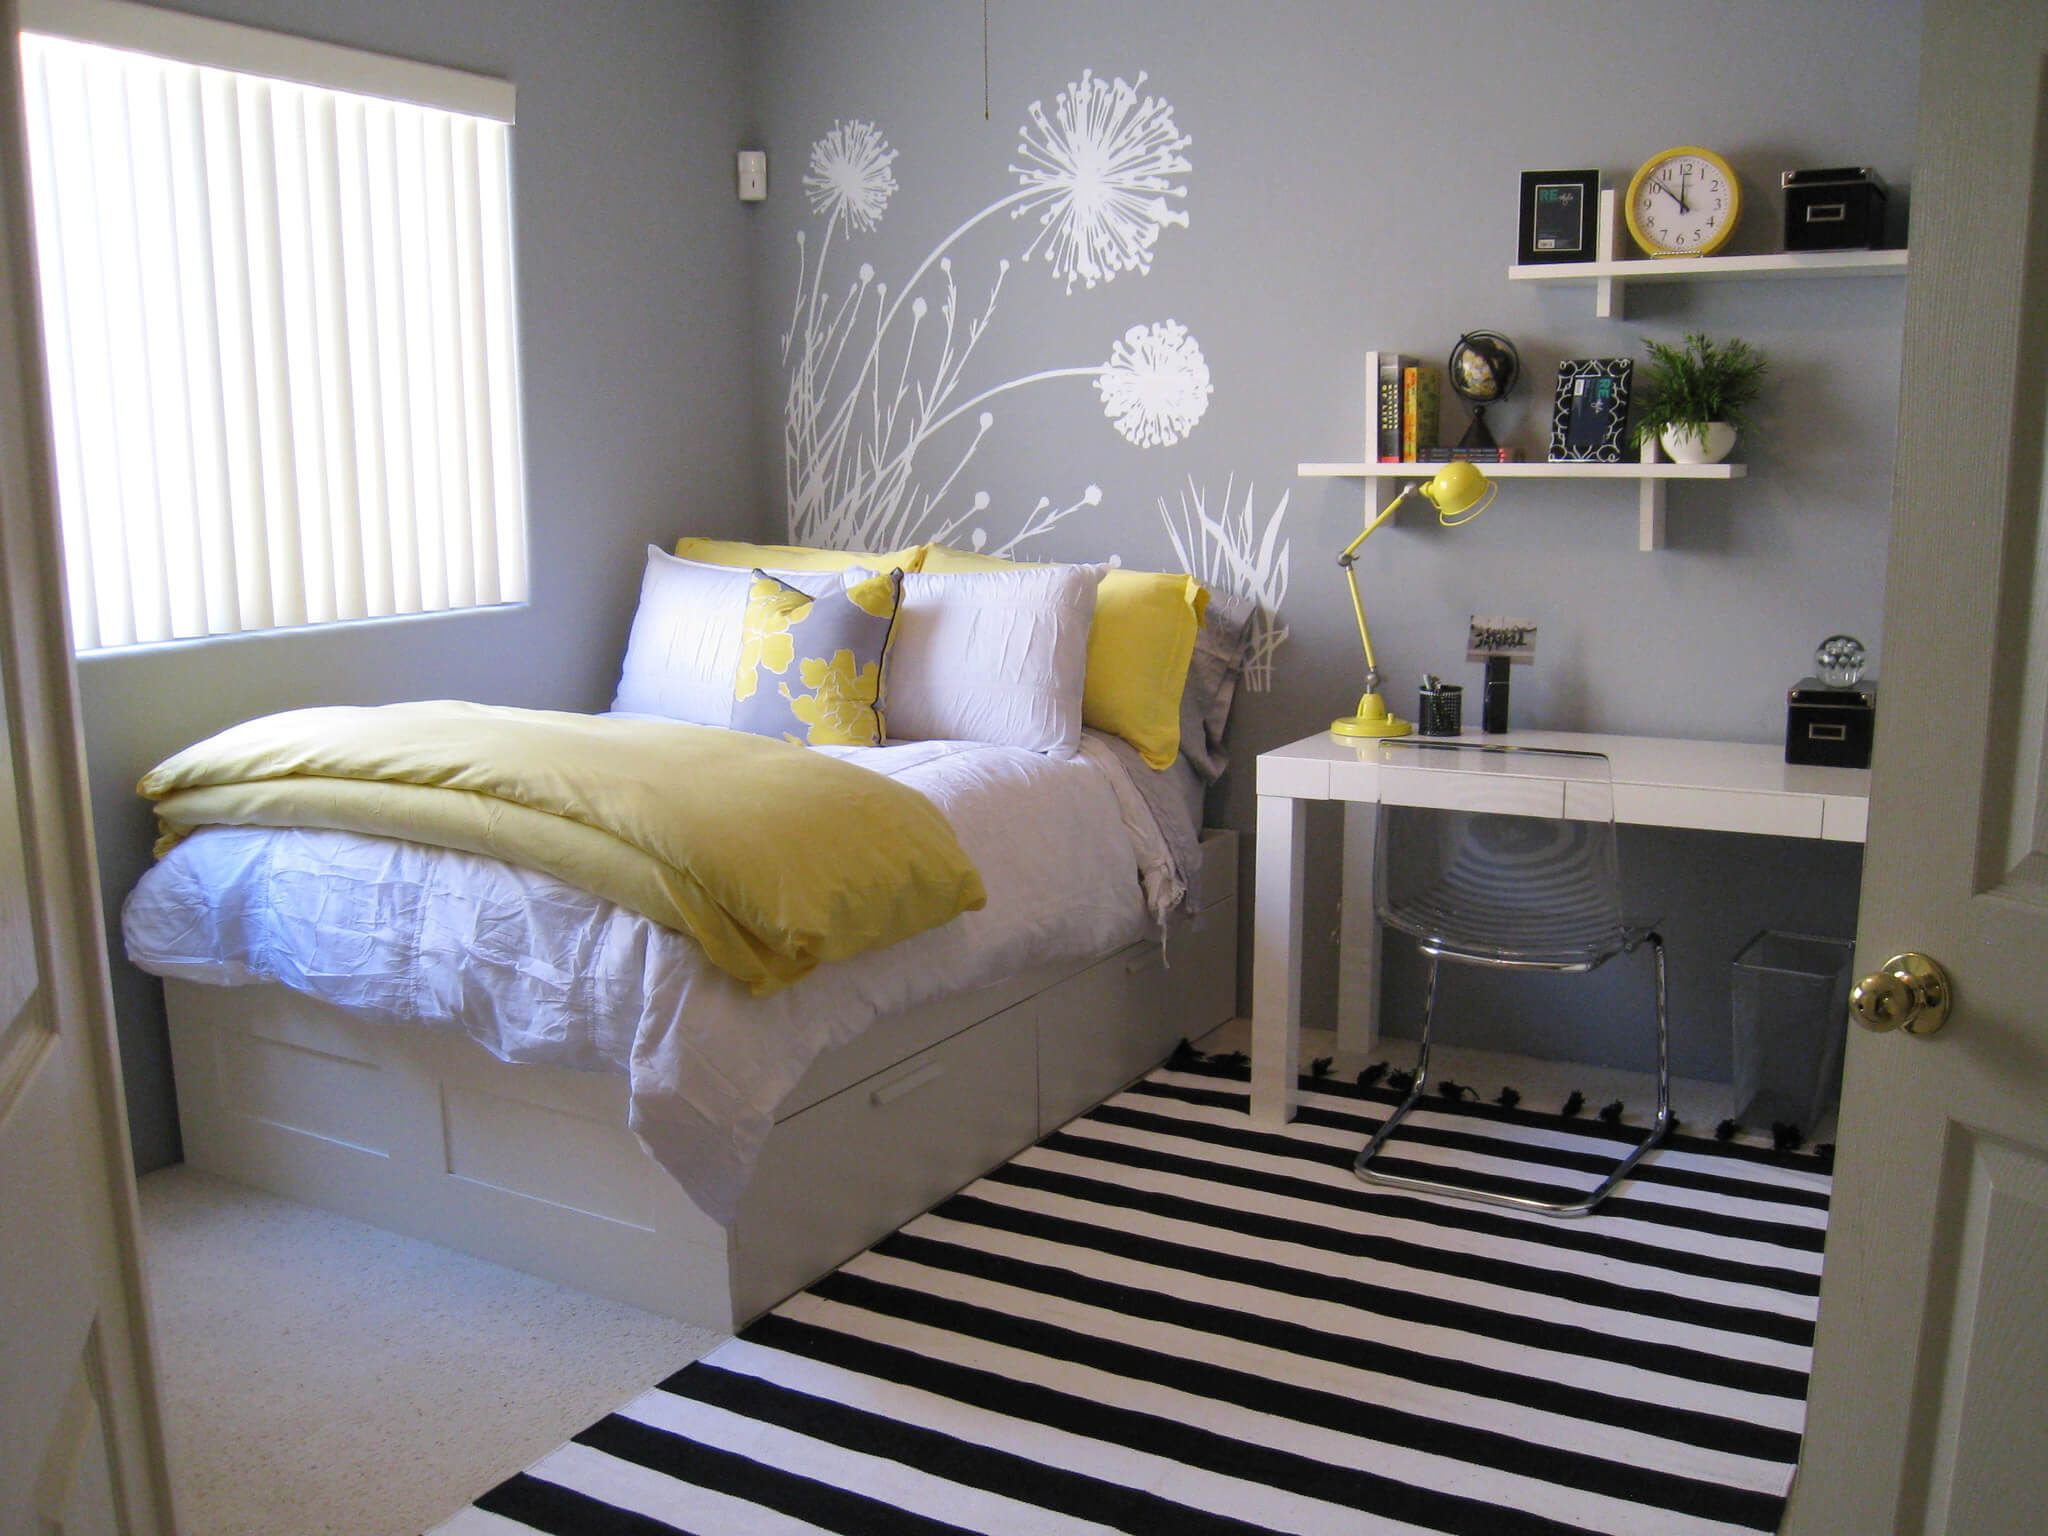 5 Tips To Make A Small Bedroom Look Bigger